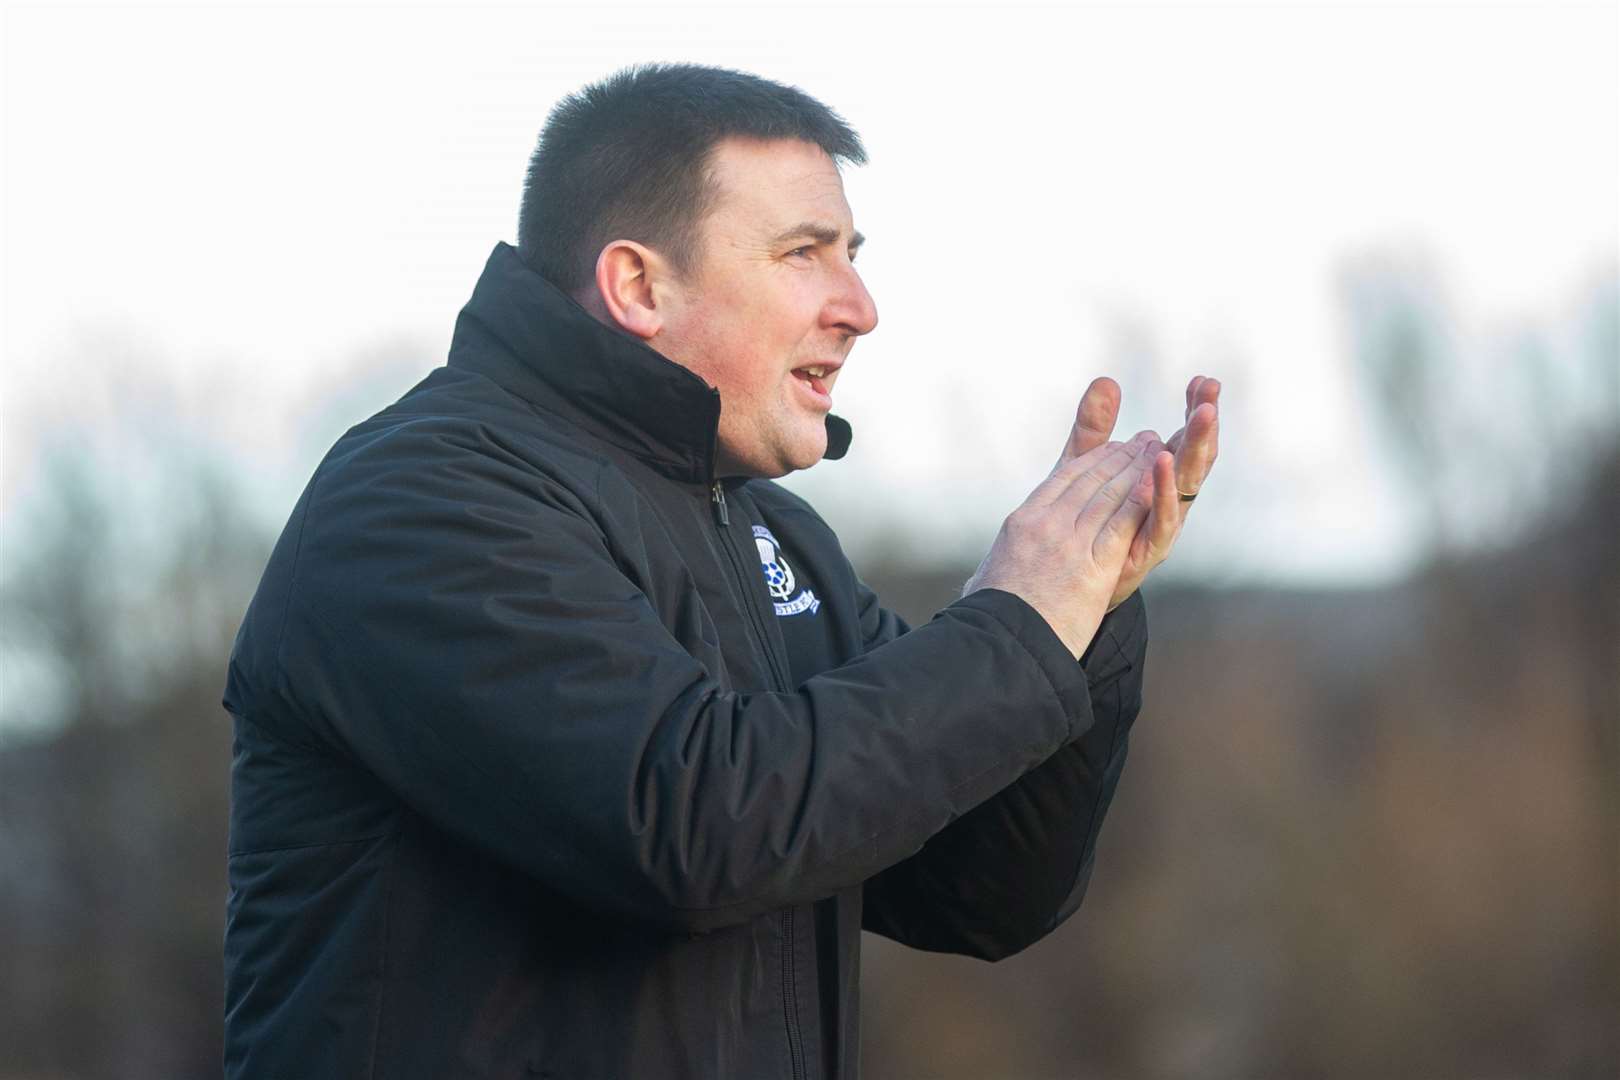 Strathspey Thistle manager Gordon Nicolson encourages his player during their away trip to Rothes at the start of February last year in what turned out to tbe one of the final games before the enforced lay-off. Picture: Daniel Forsyth..